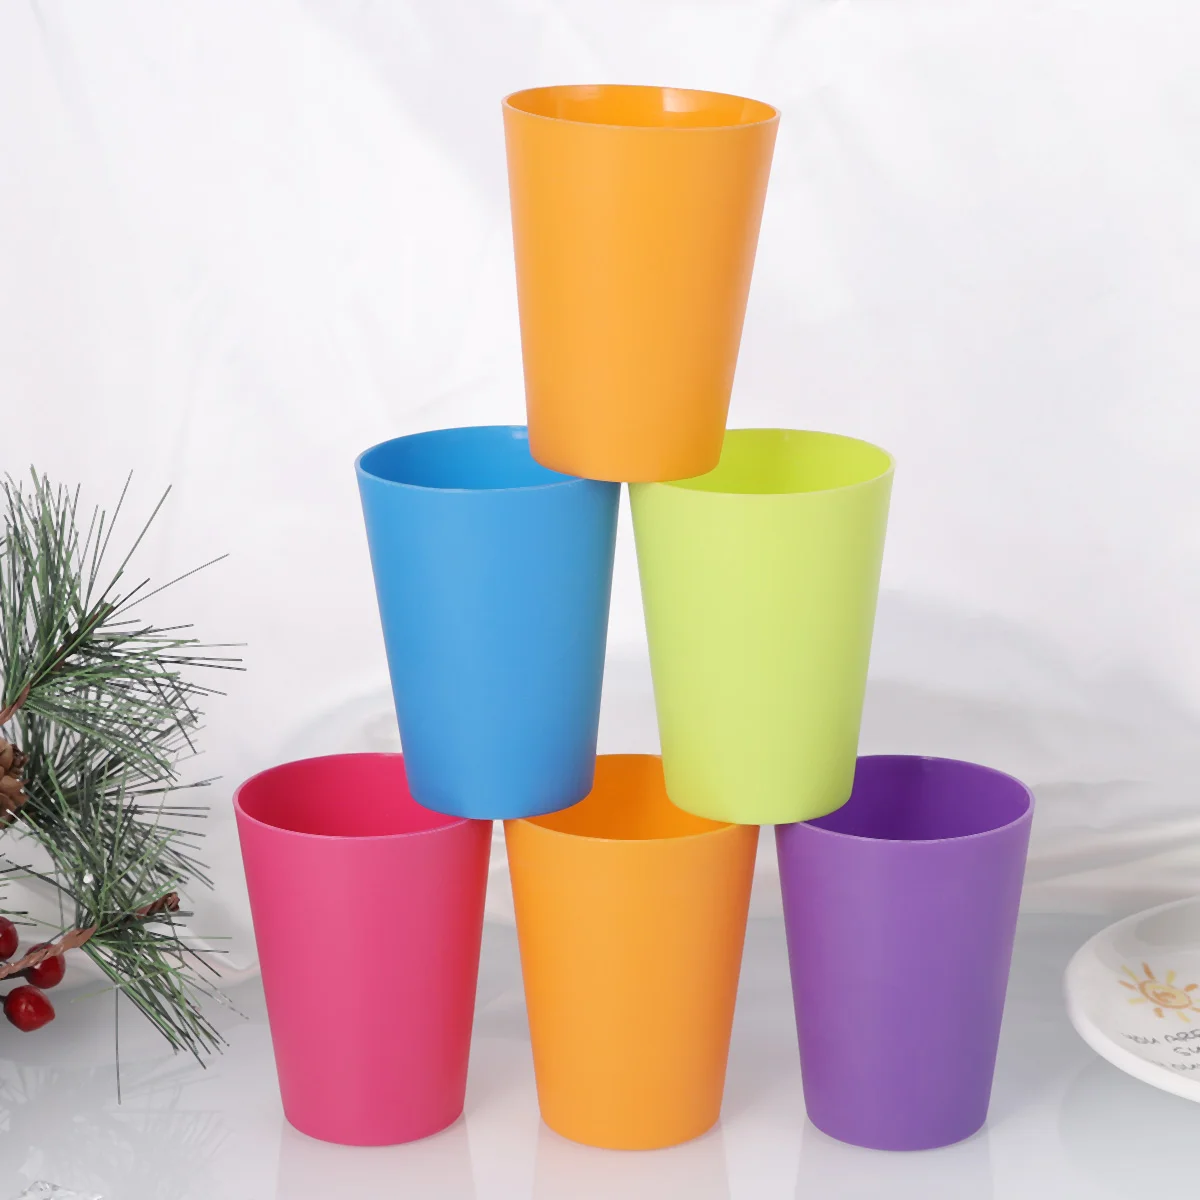 

cups small kids cup toddler drinking lid dishwasher safe- 15pcs Cups Colorful Reusable Water Cups Drinking Cup Party Supplies